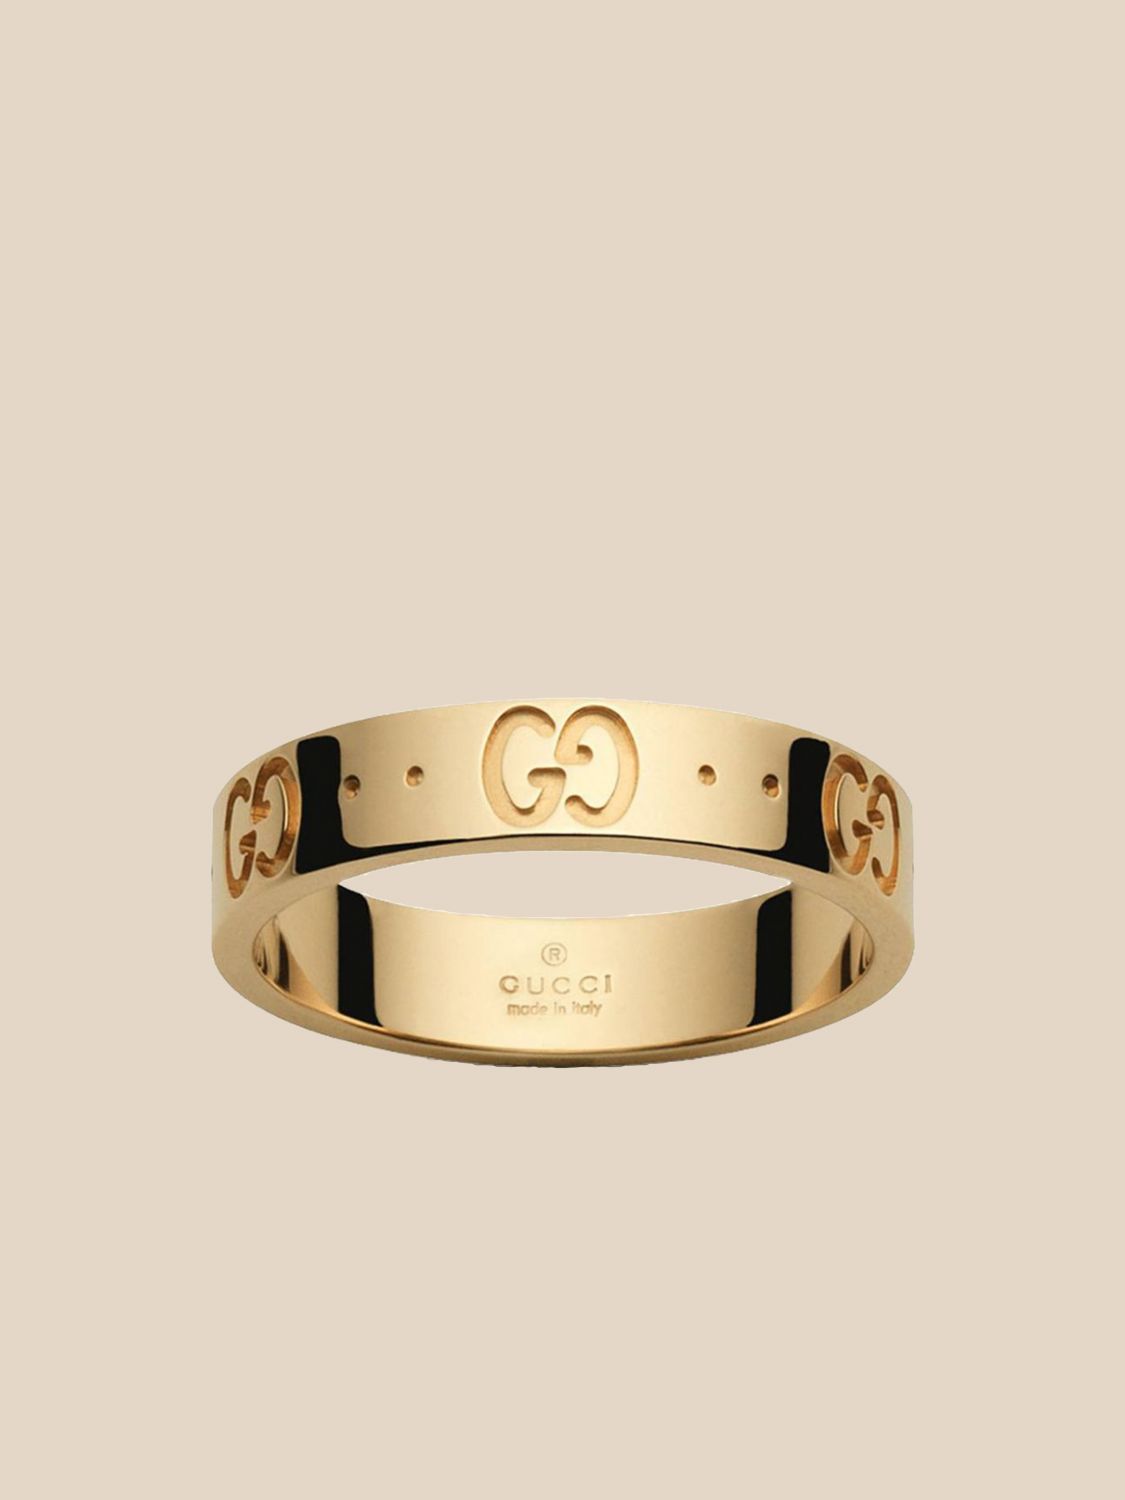 GUCCI: Icon in with engraved GG | Jewel Gucci Women Gold | Jewel Gucci YBC073230001 GIGLIO.COM